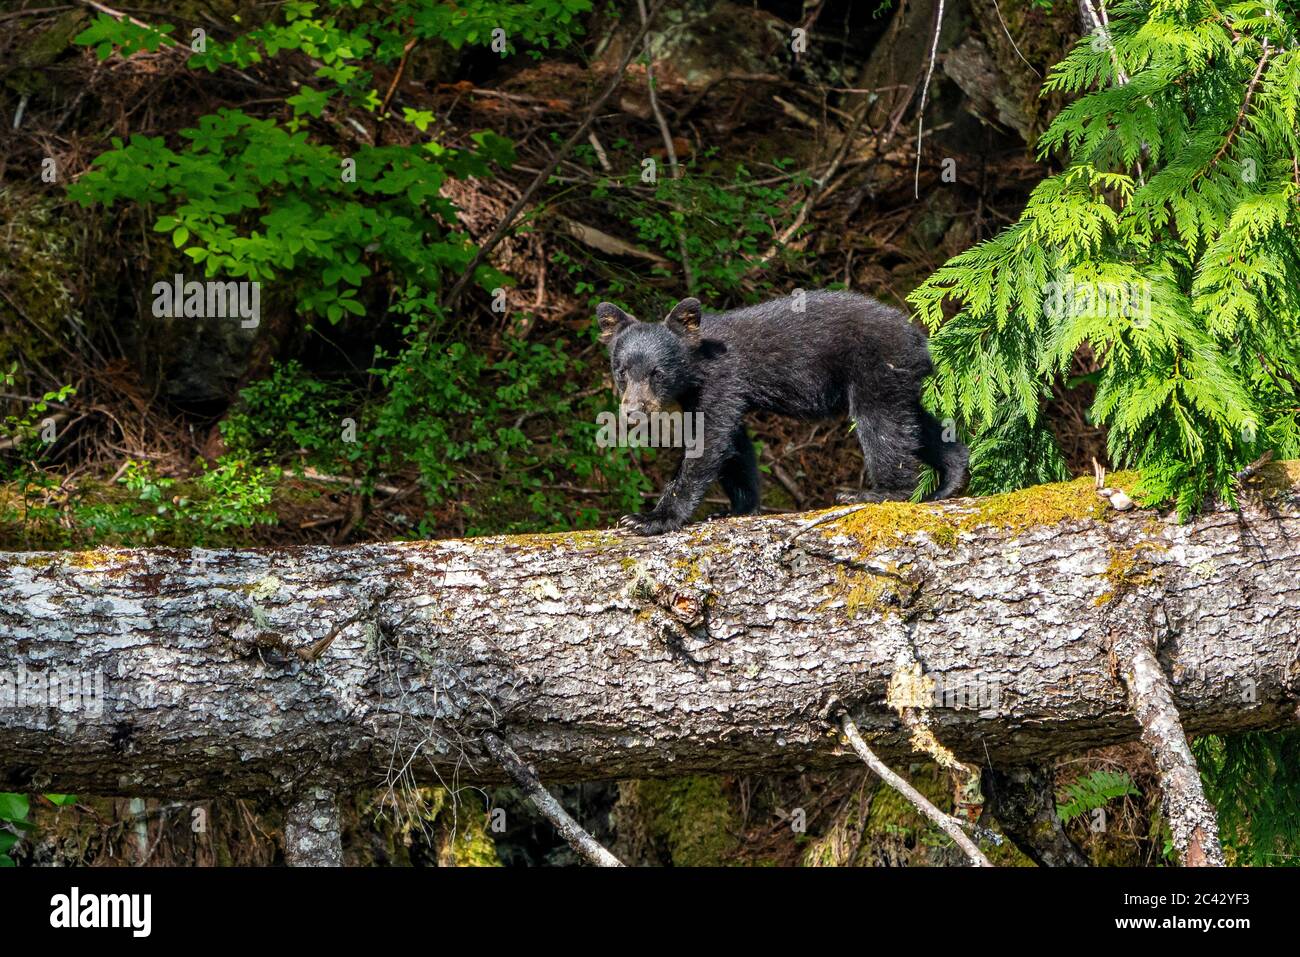 First year black bear cub walking over a tree on an island in the Broughton Archipelago, British Columbia, Canada. Stock Photo